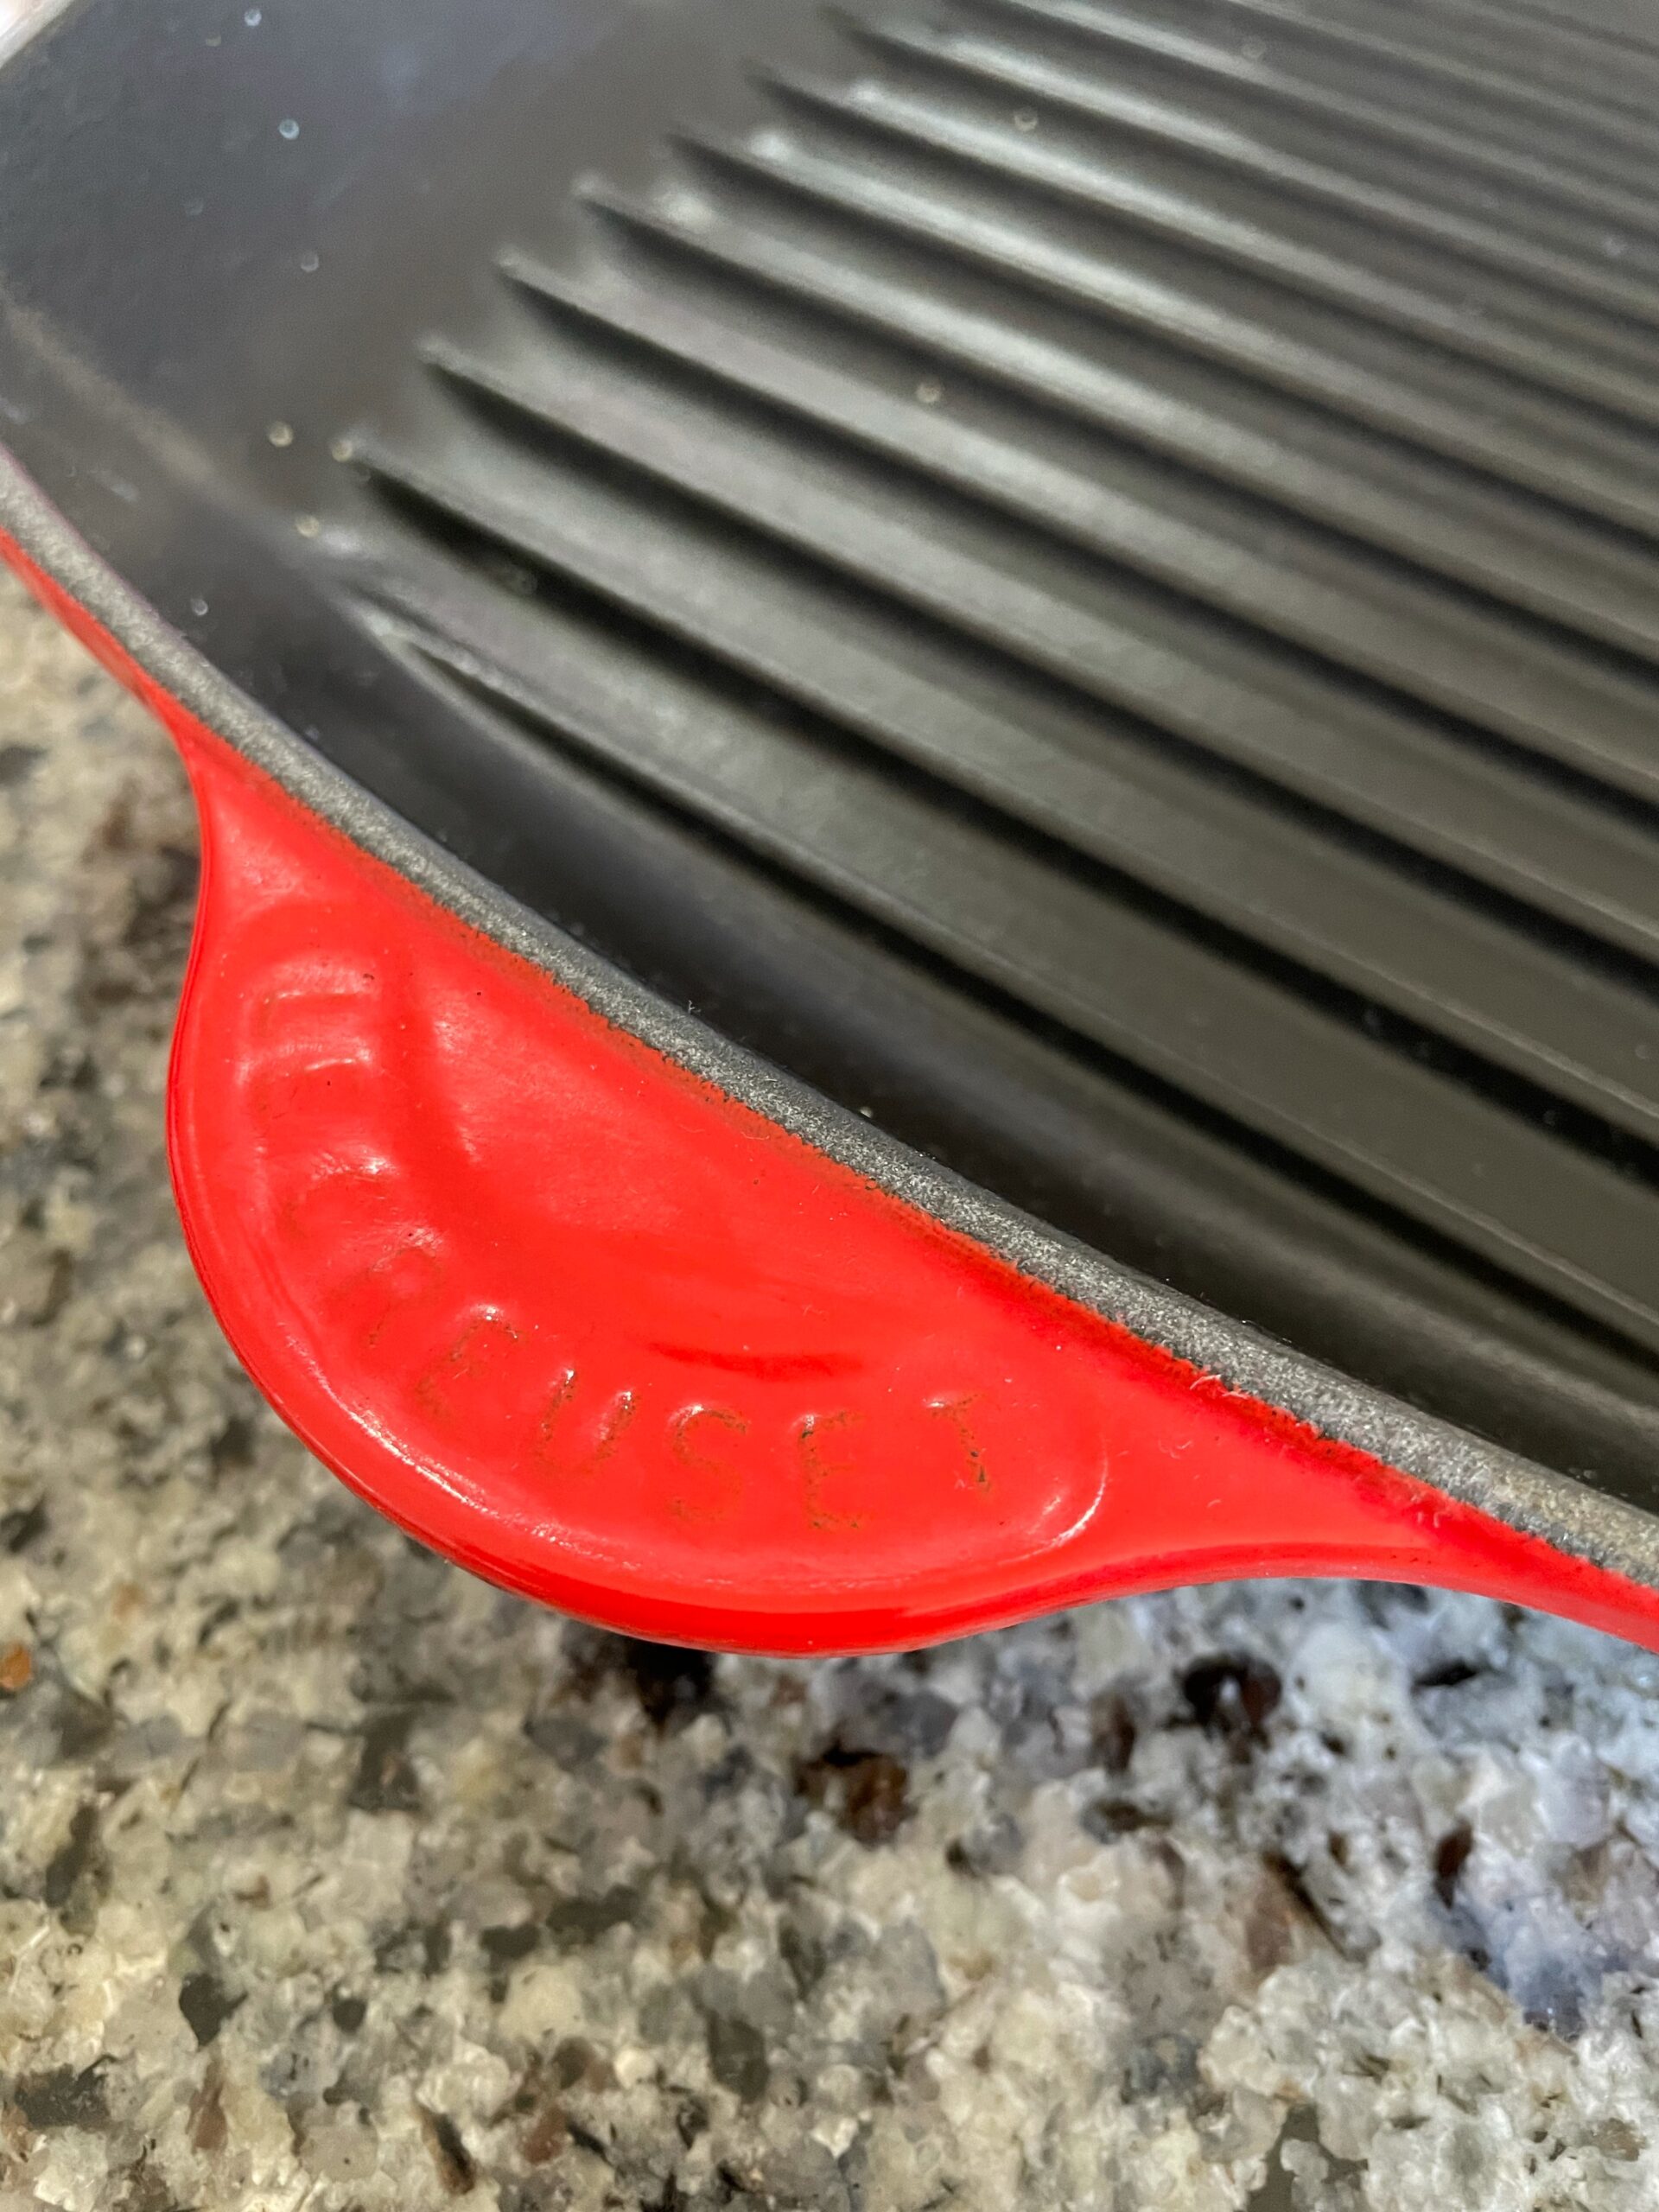 photo of a red enameled le crueset grilling pan